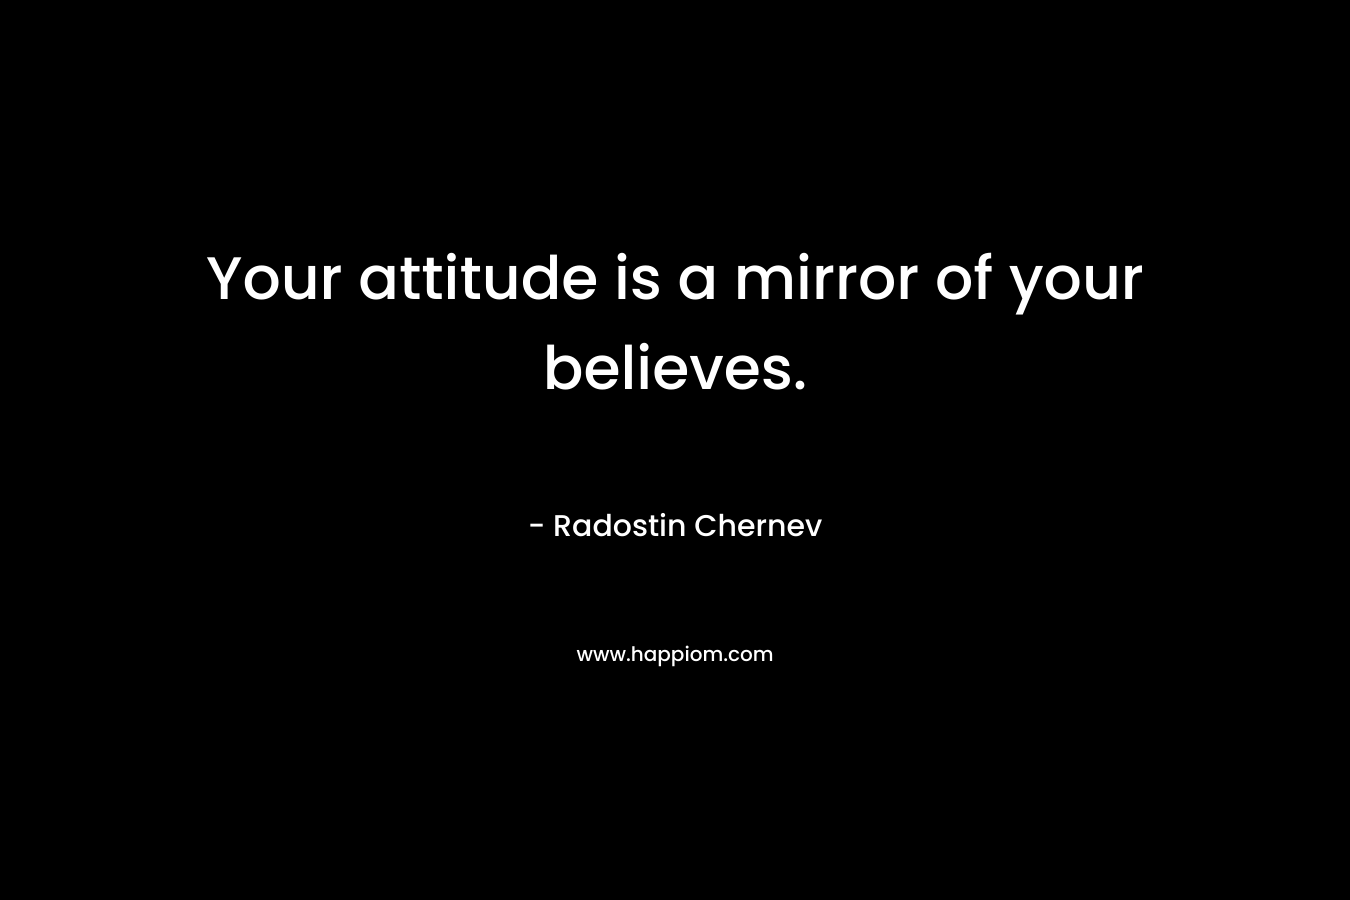 Your attitude is a mirror of your believes. – Radostin Chernev